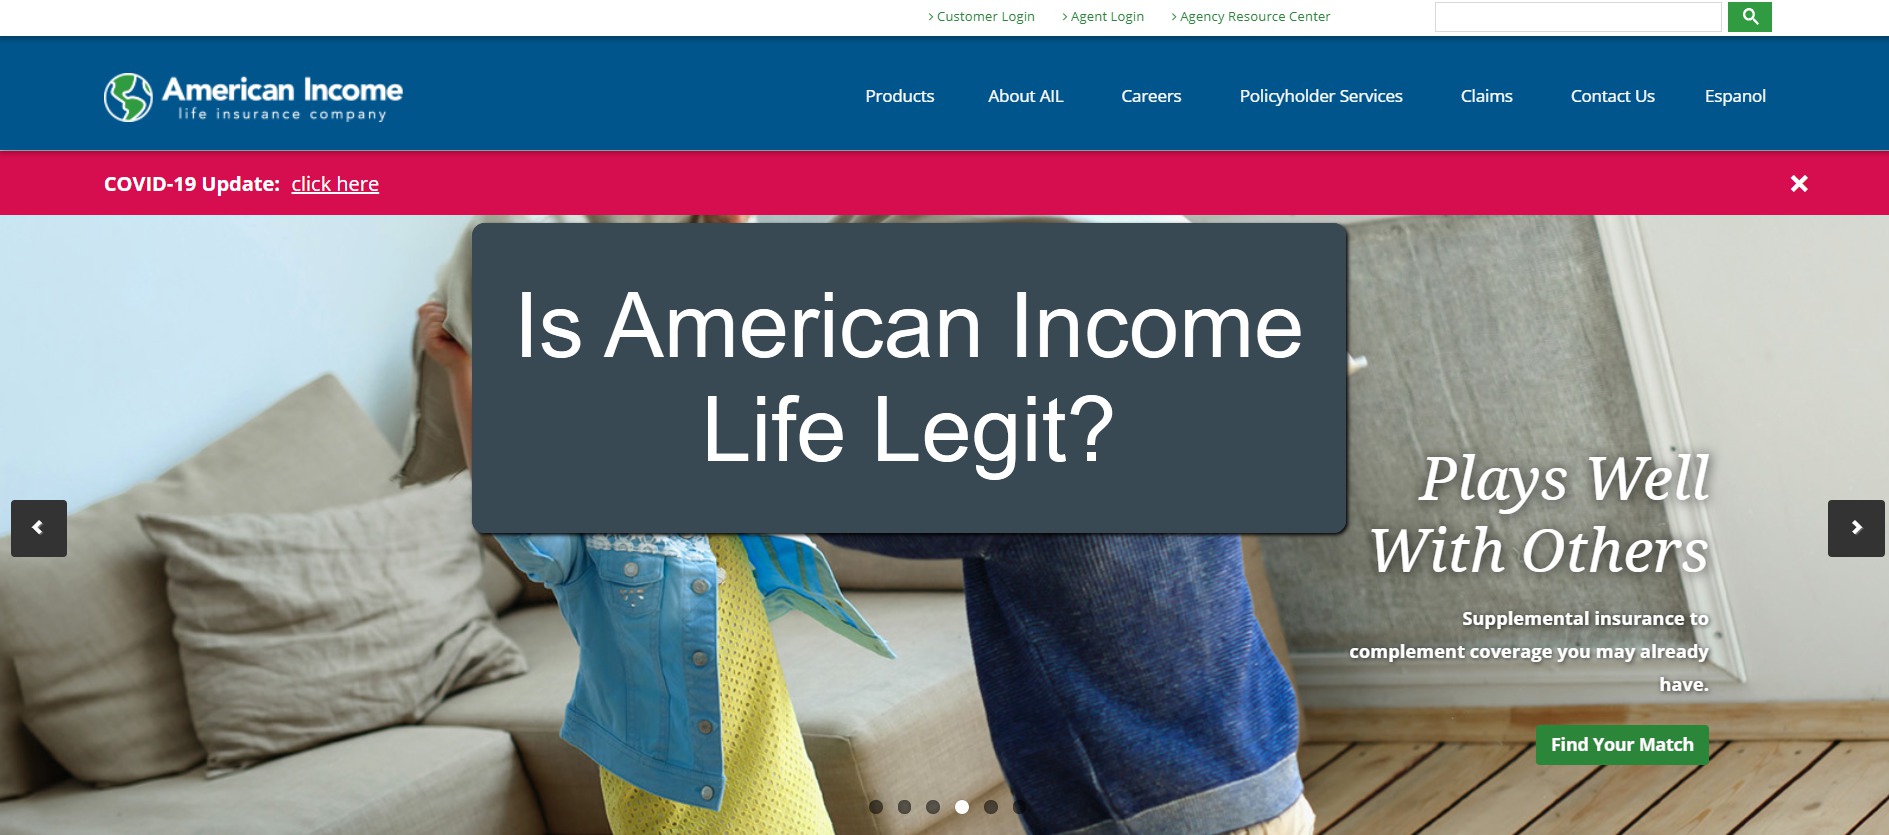 Ail american income complaints job opportunity